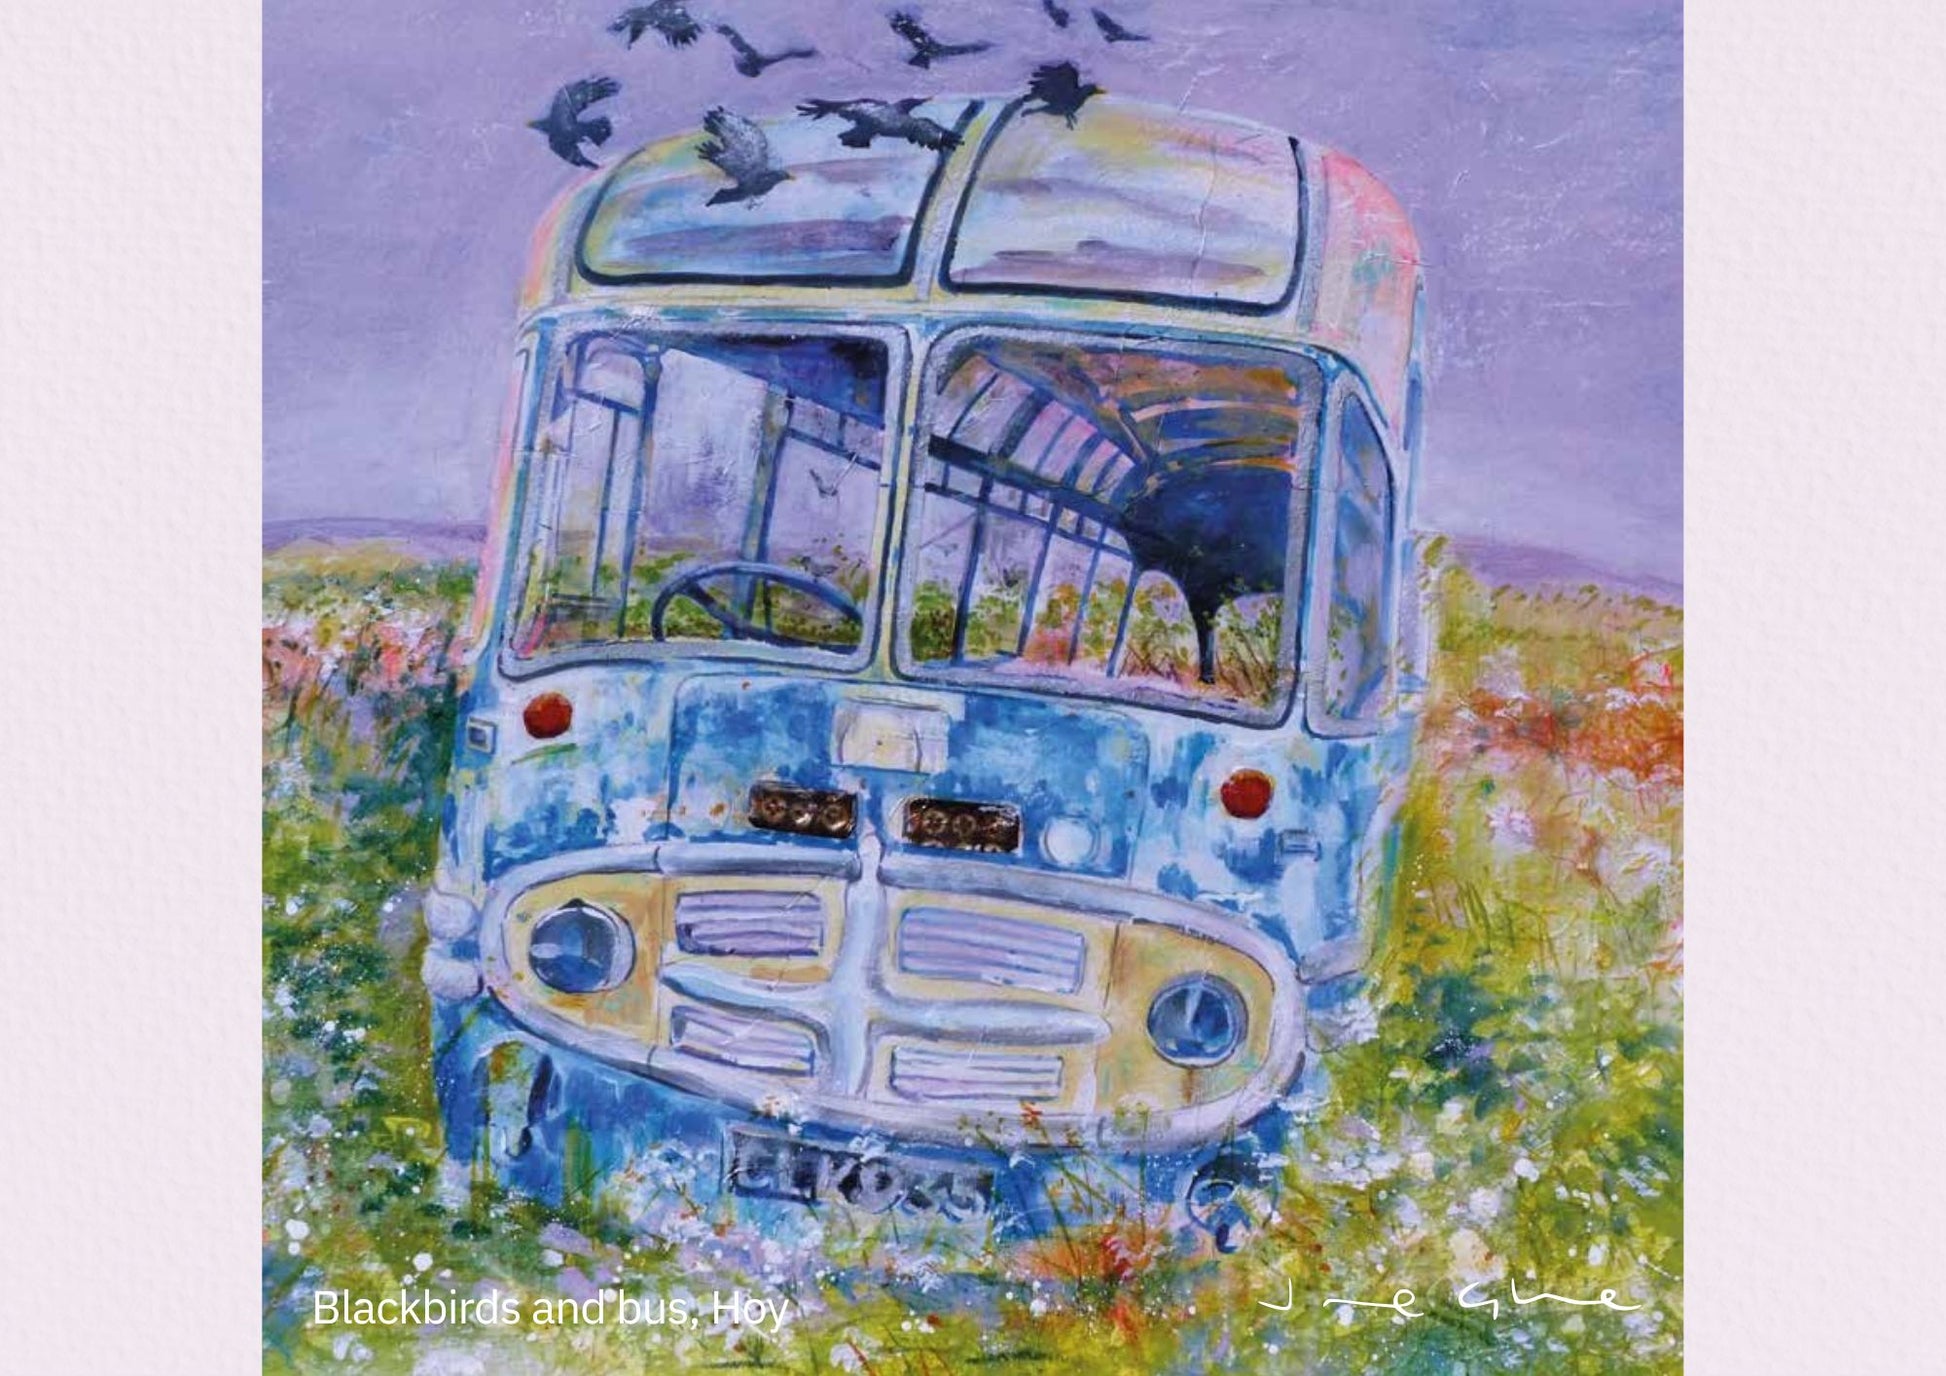 Orkney calendar 2025 June page with mixed media painting of an old bus sitting in a field with blackbirds flying above in the island of Hoy by Orkney artist Jane Glue Scotland